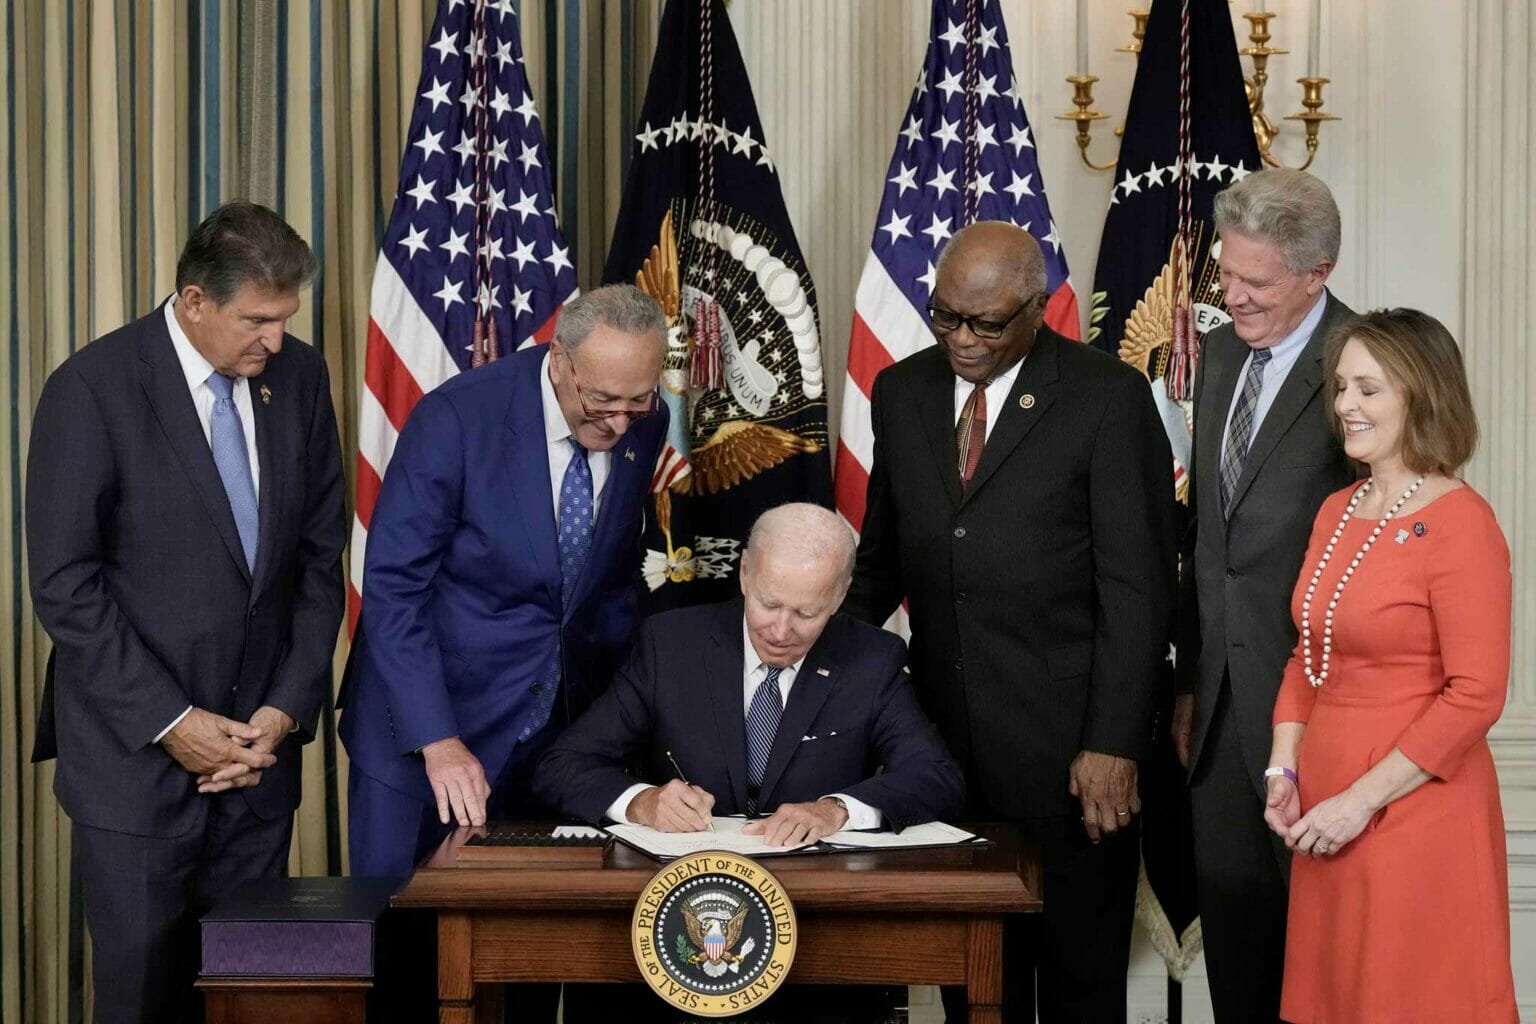 Biden Signs Inflation Reduction Act